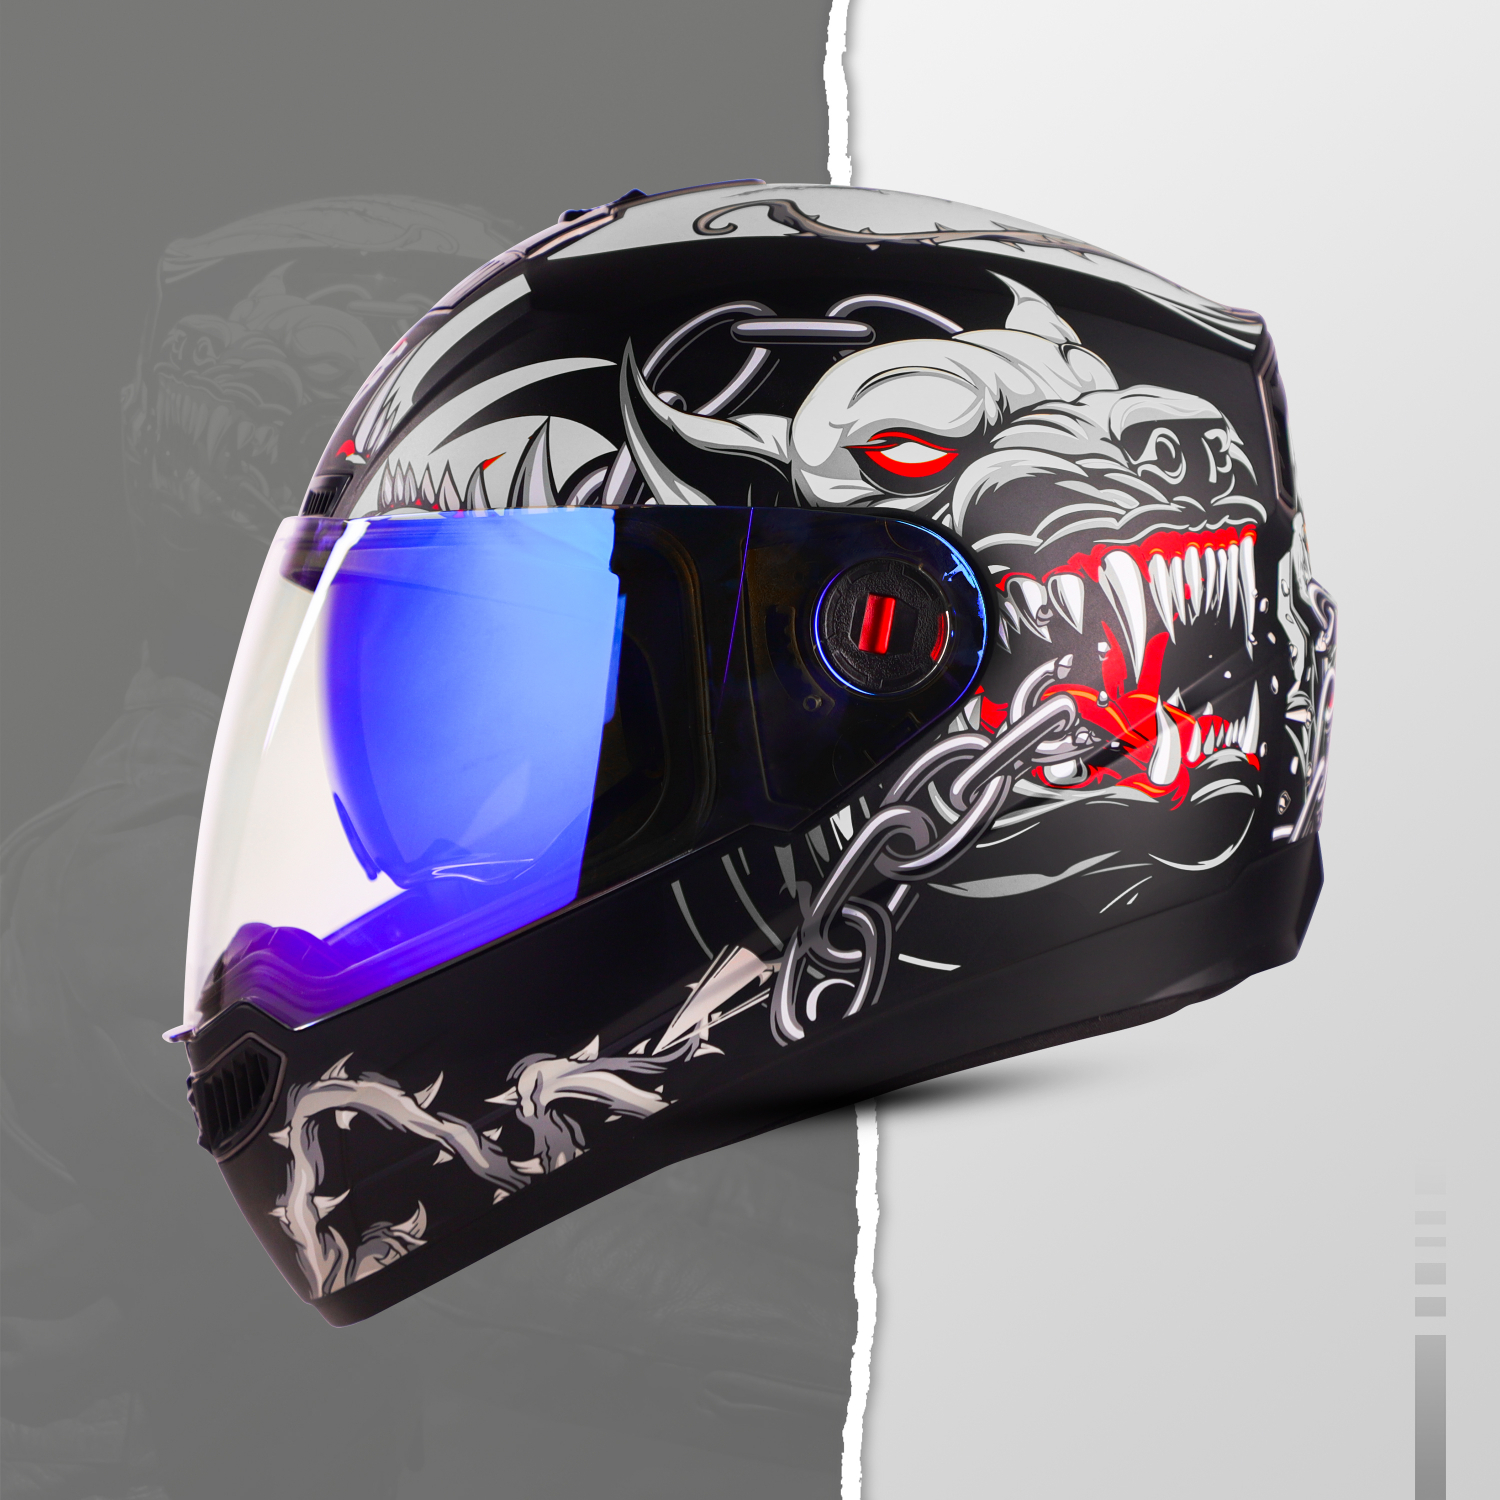 Steelbird SBA-1 Angry Dog ISI Certified Full Face Graphic Helmet For Men And Women With Inner Smoke Sun Shield (Matt Black Grey With Night Vision Blue Visor)